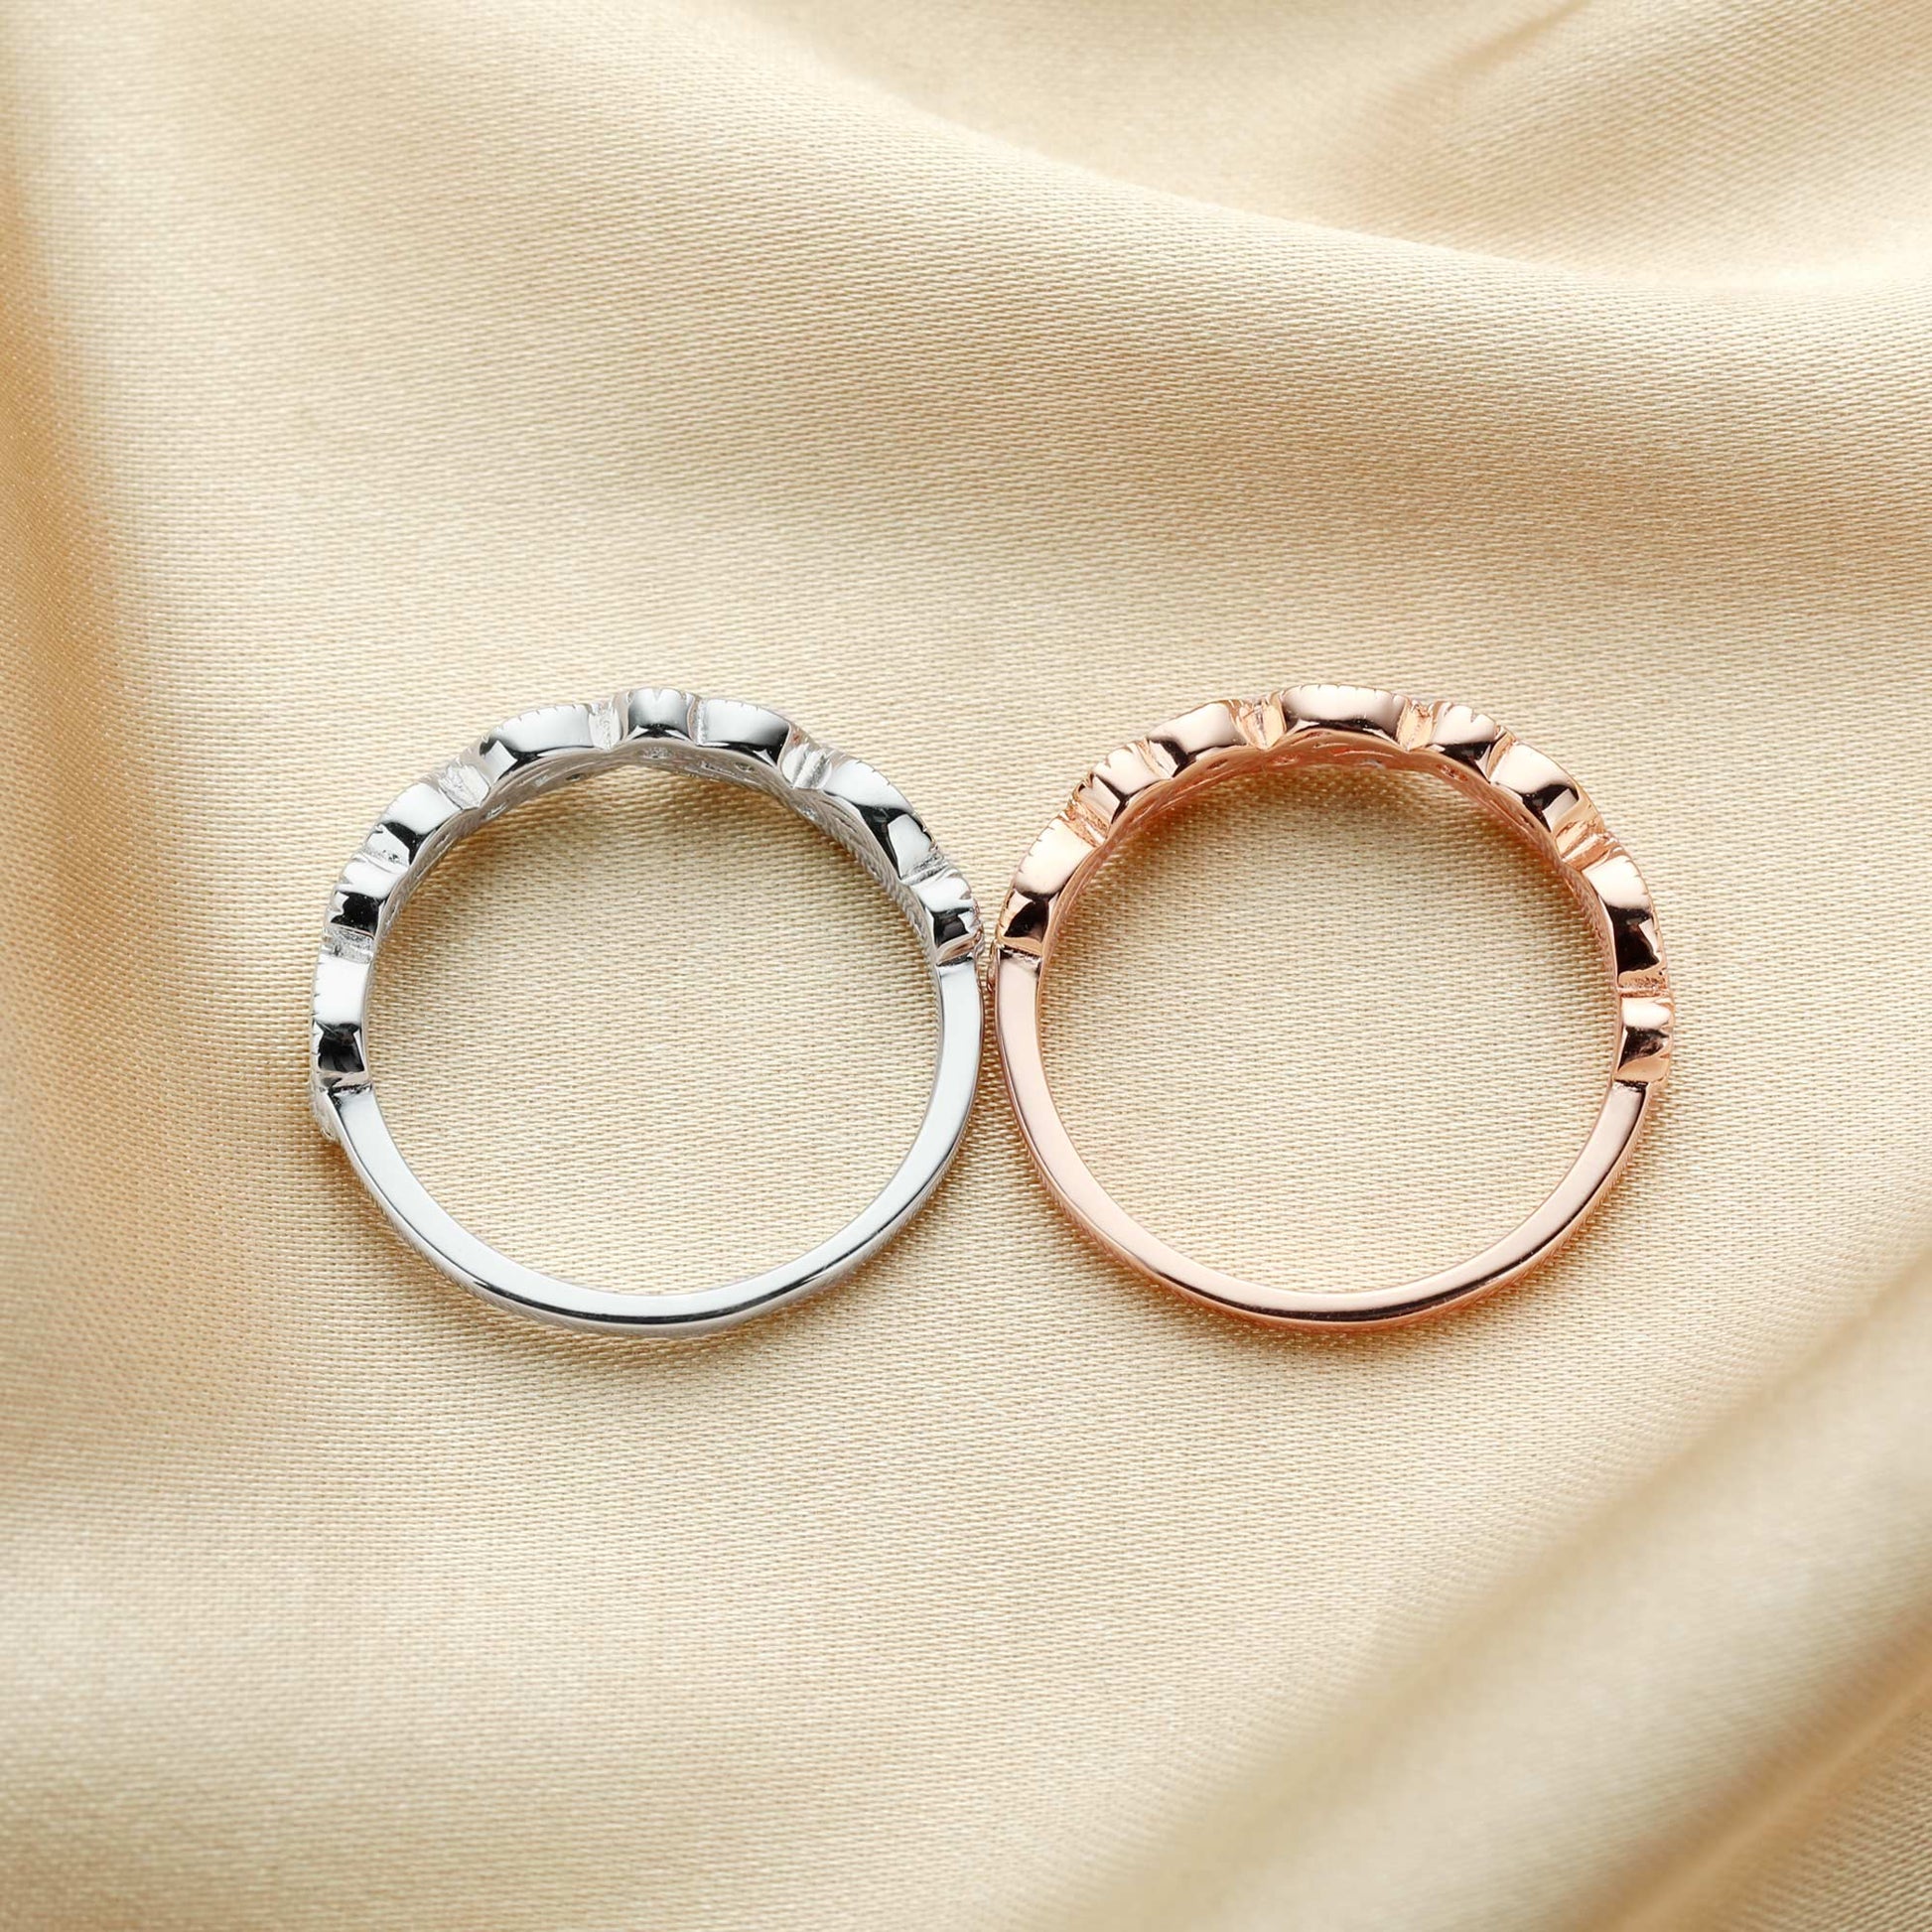 One silver and one rose gold swirl and leaf designed bands set with clear small gems.